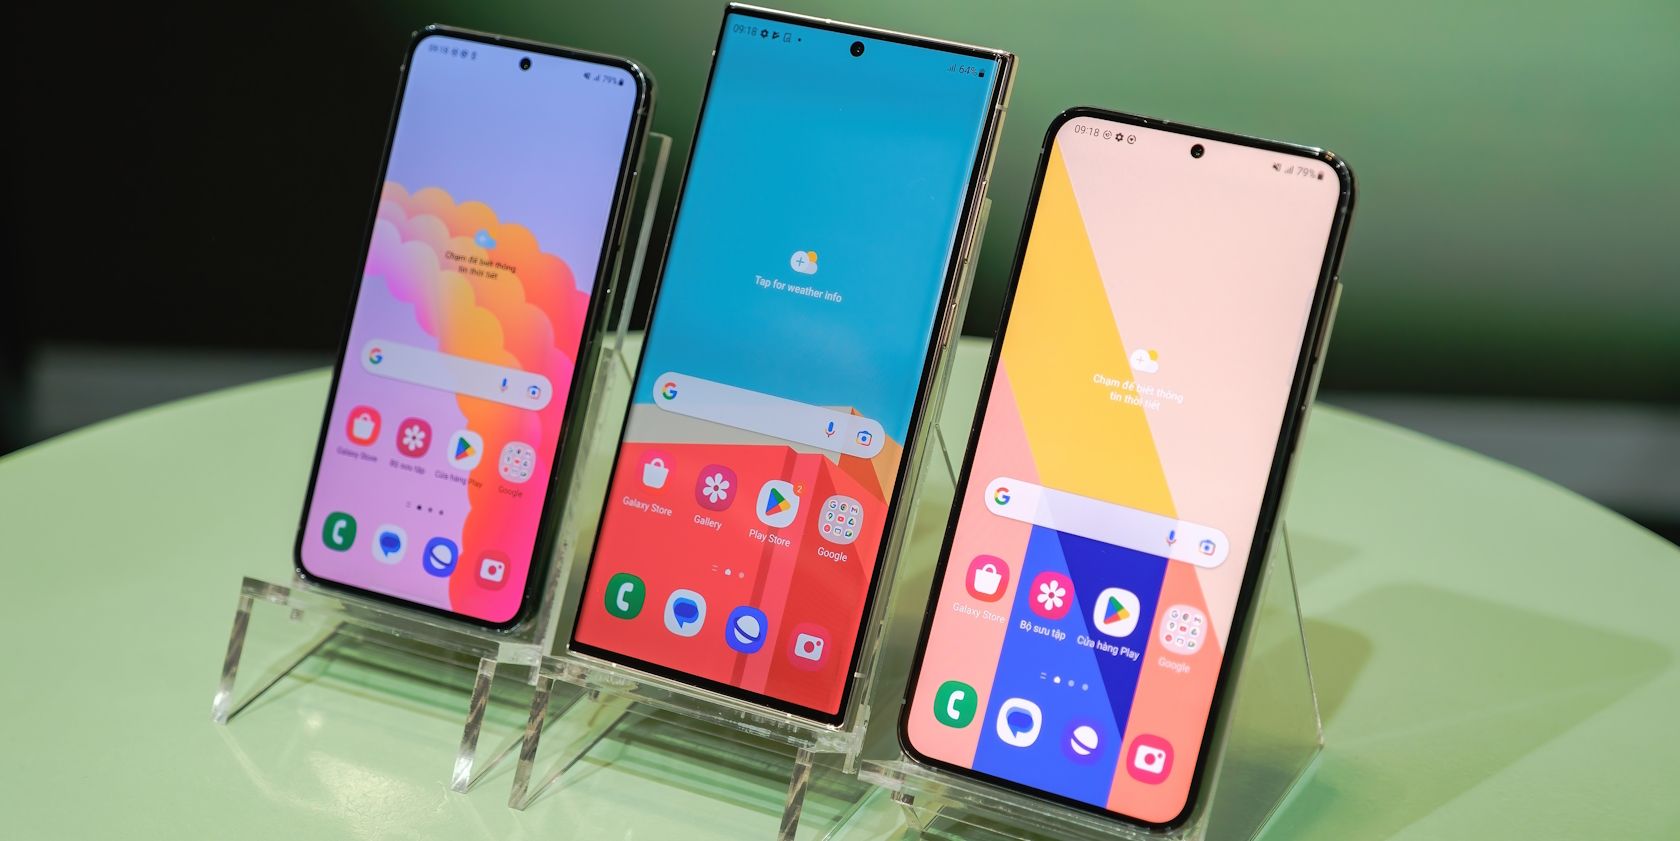 Three Samsung phones showcased on a table at a show